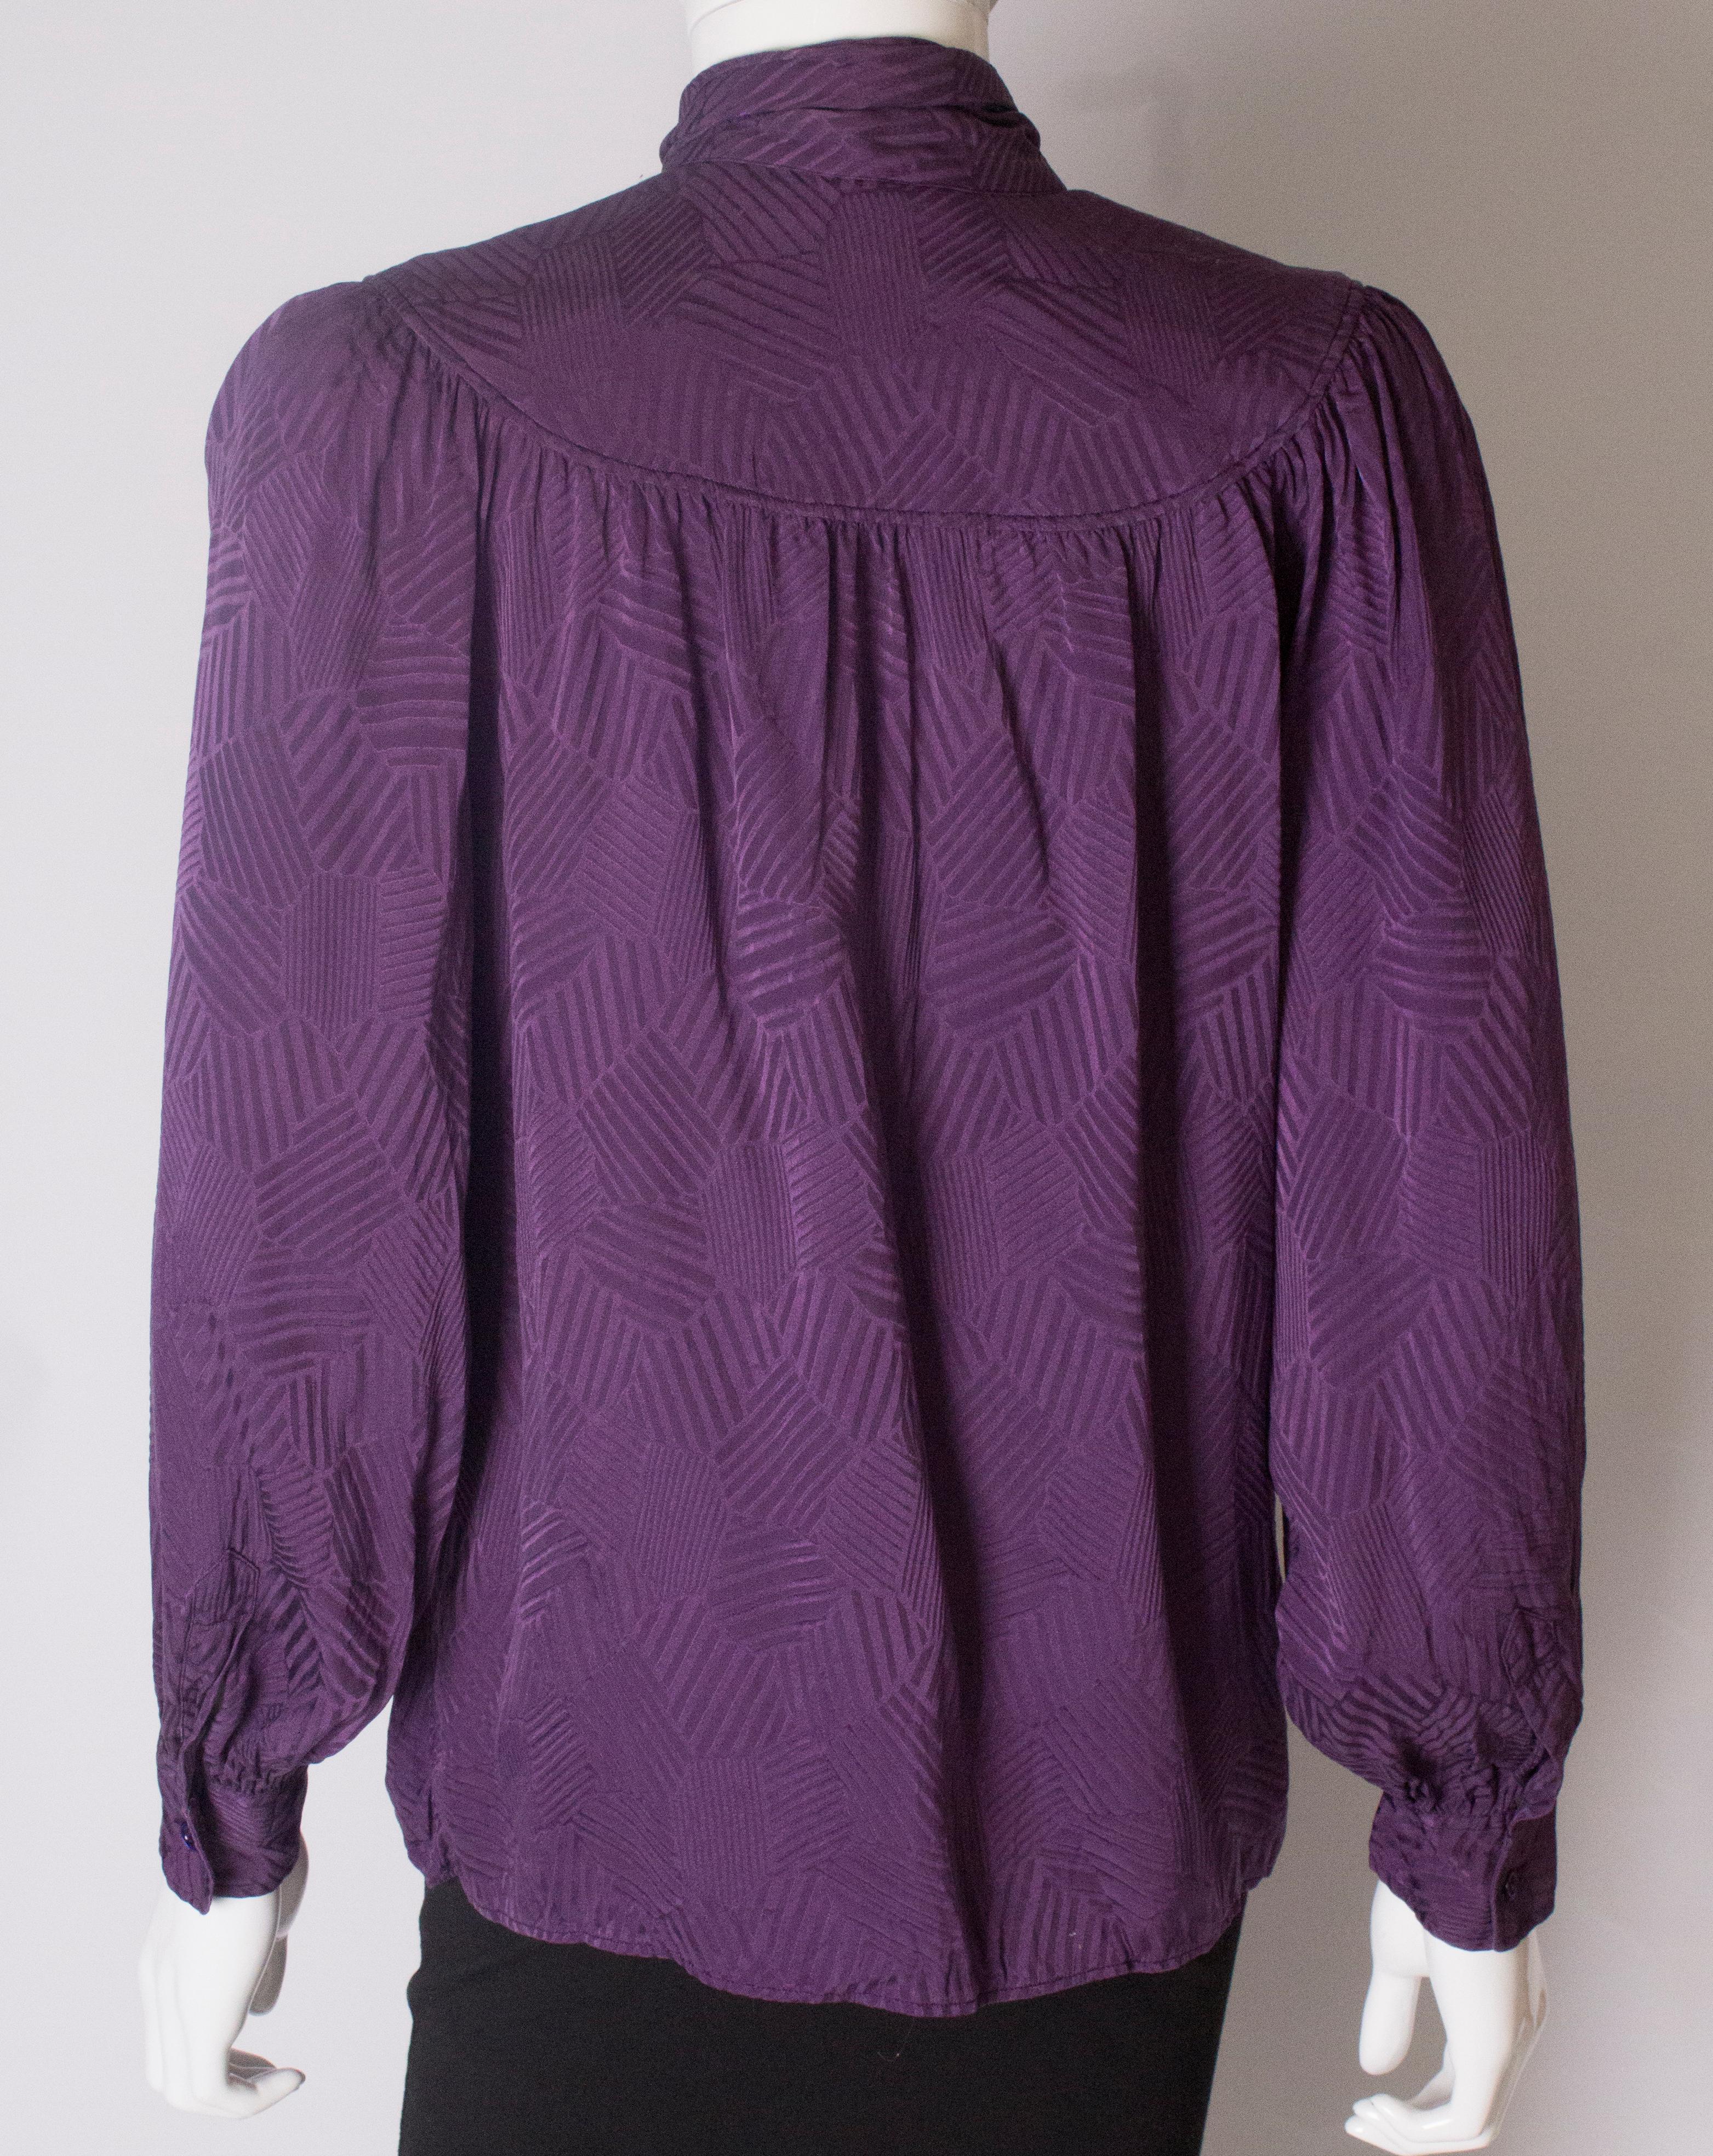 A Vintage 1970s silk purple pussy bow blouse by Yves Saint Laurent  1